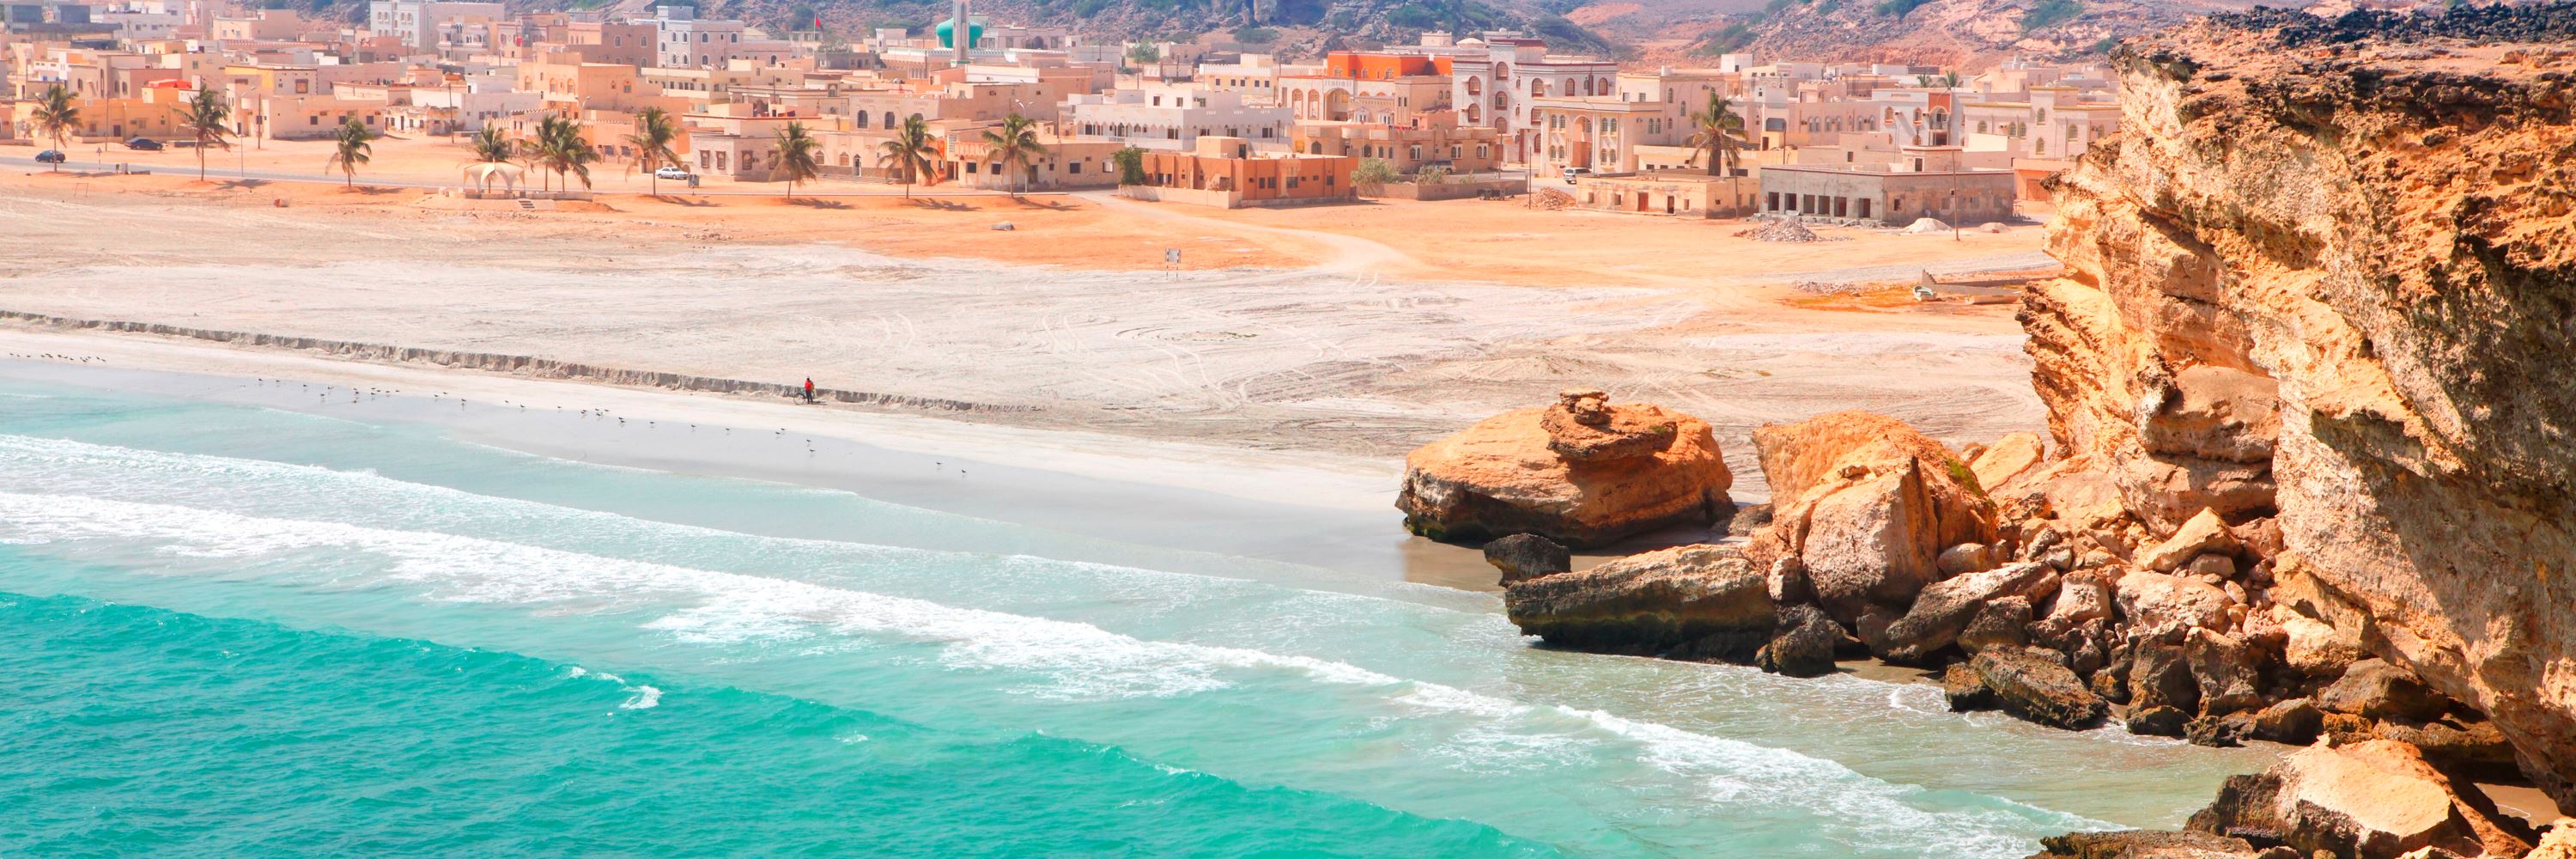 Best Time to Visit Oman | Climate Guide | Audley